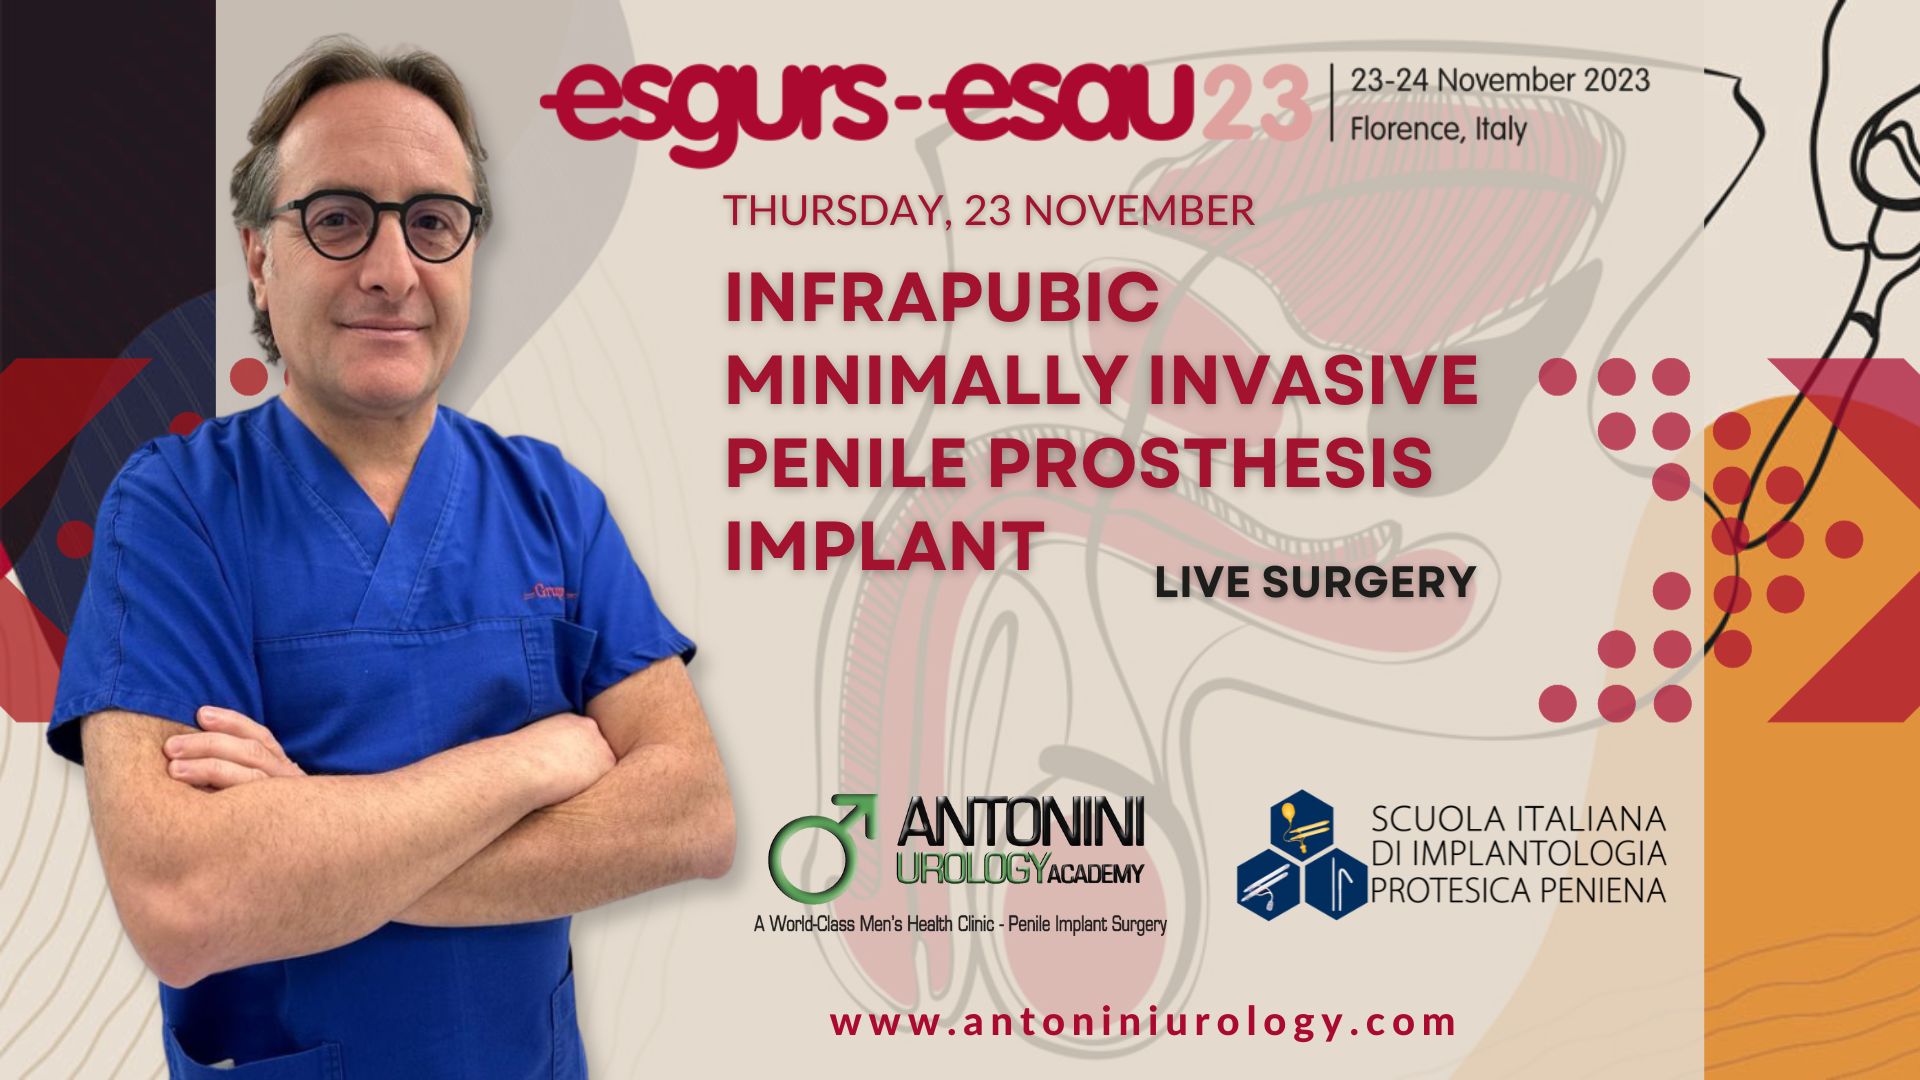 The ESGURS-ESAU 23 event, organised by the European Society for Surgery, is an important opportunity to share knowledge on minimally invasive surgery.